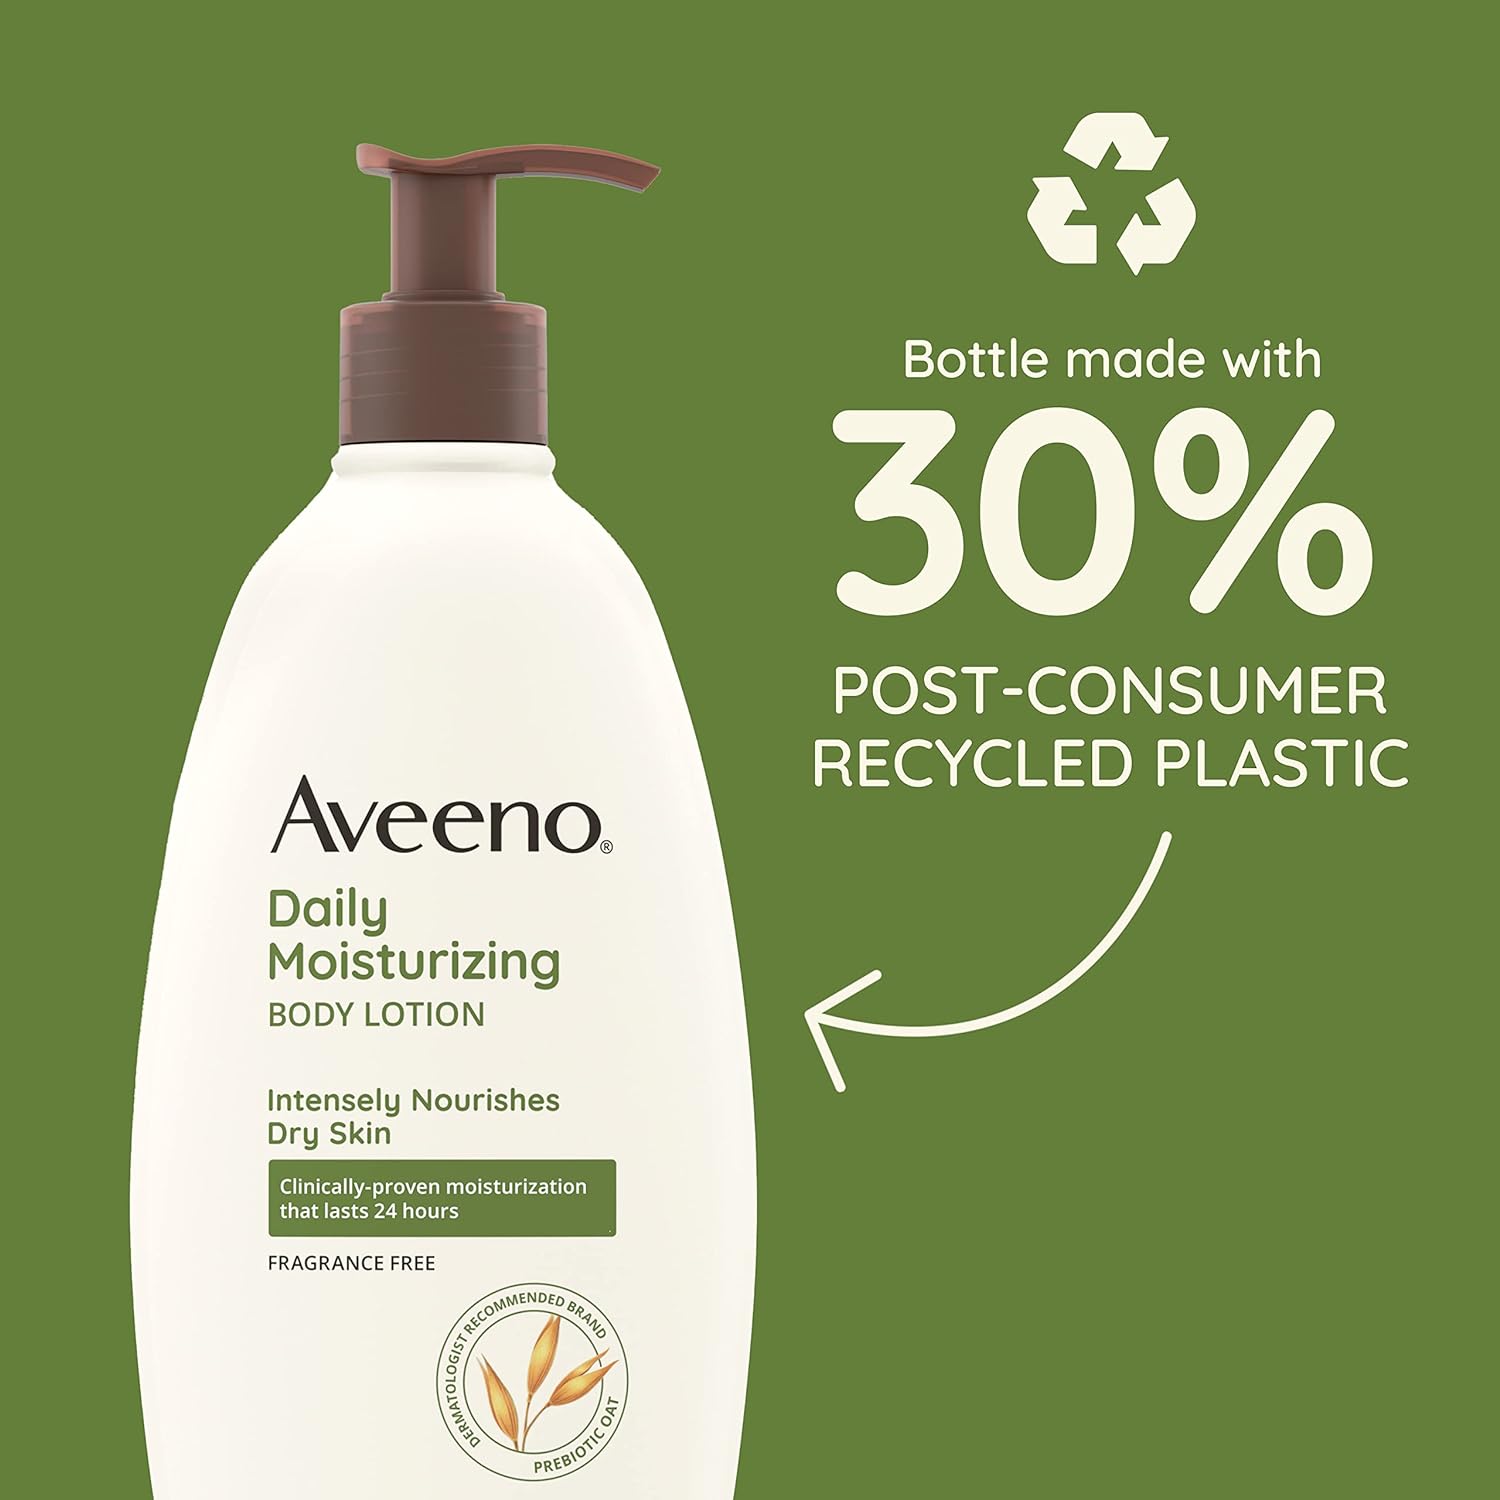 Aveeno Daily Moisturizing Body Lotion with Soothing Prebiotic Oat, Gentle Lotion Nourishes Dry Skin With Moisture, Paraben-, Dye- & Fragrance-Free, Non-Greasy & Non-Comedogenic, 12 fl. Oz : Facial Moisturizers : Beauty & Personal Care